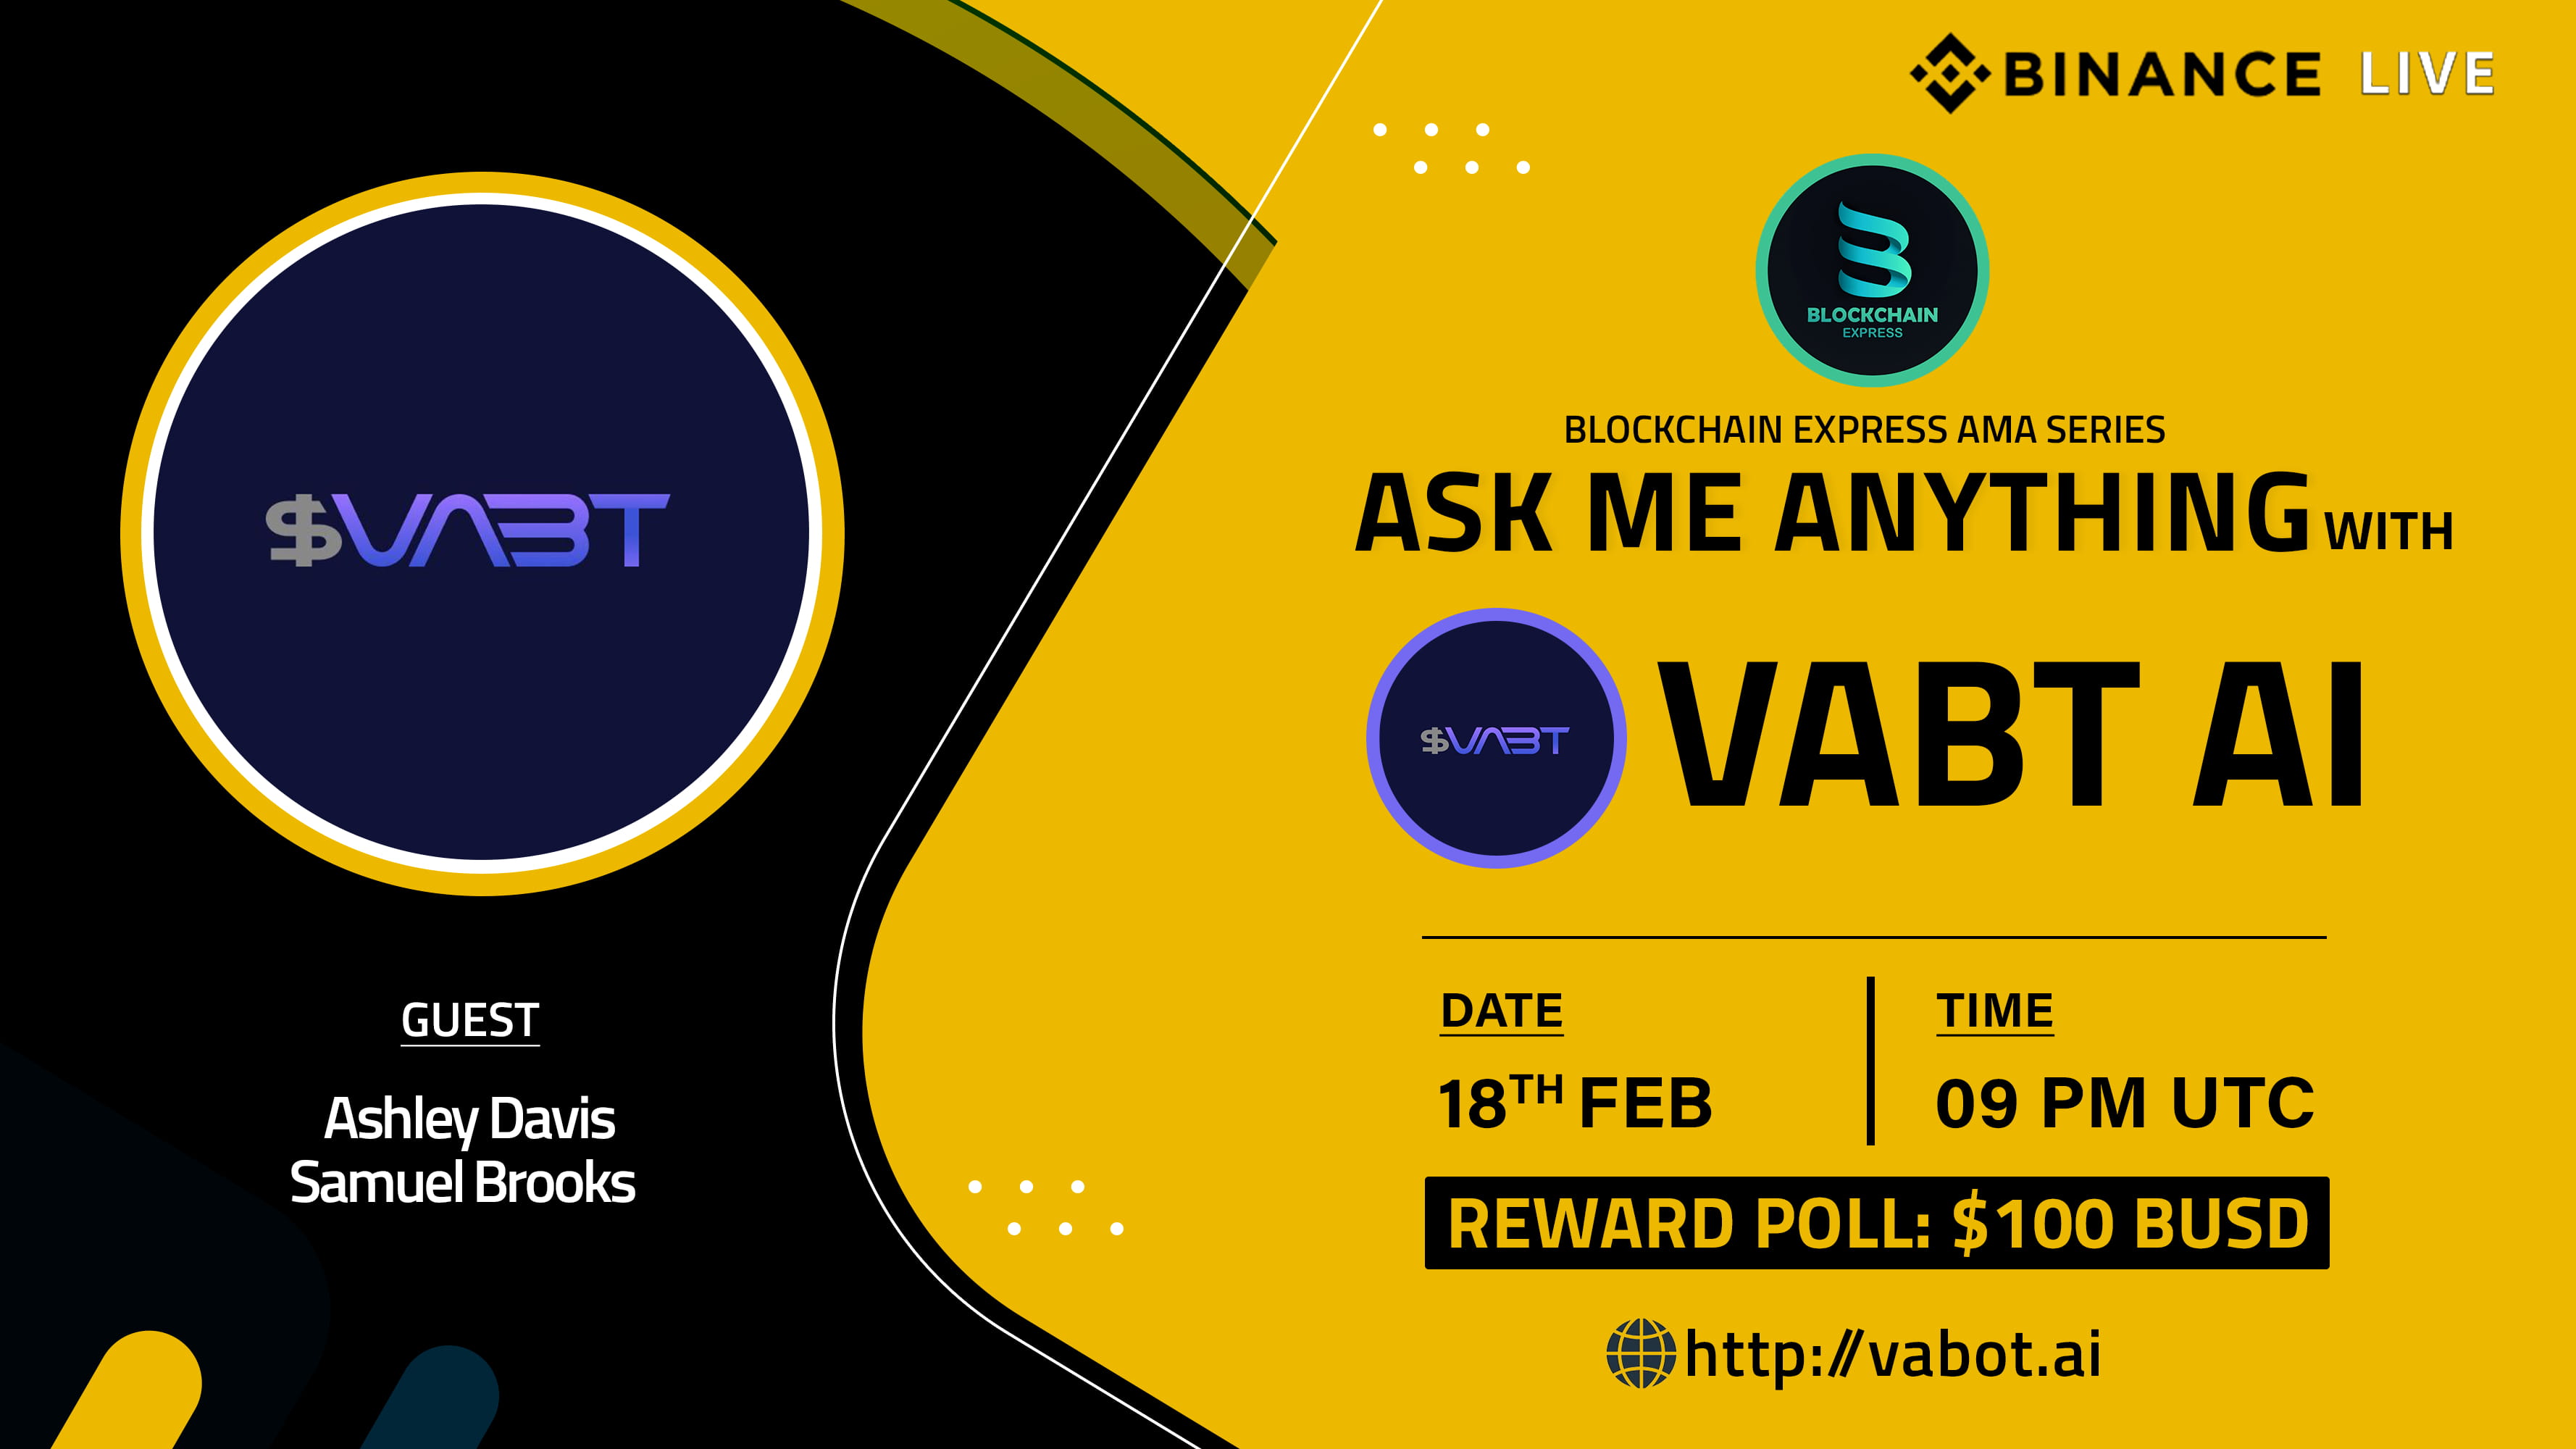 ₿lockchain Express will be hosting an session with" Vabt AI "